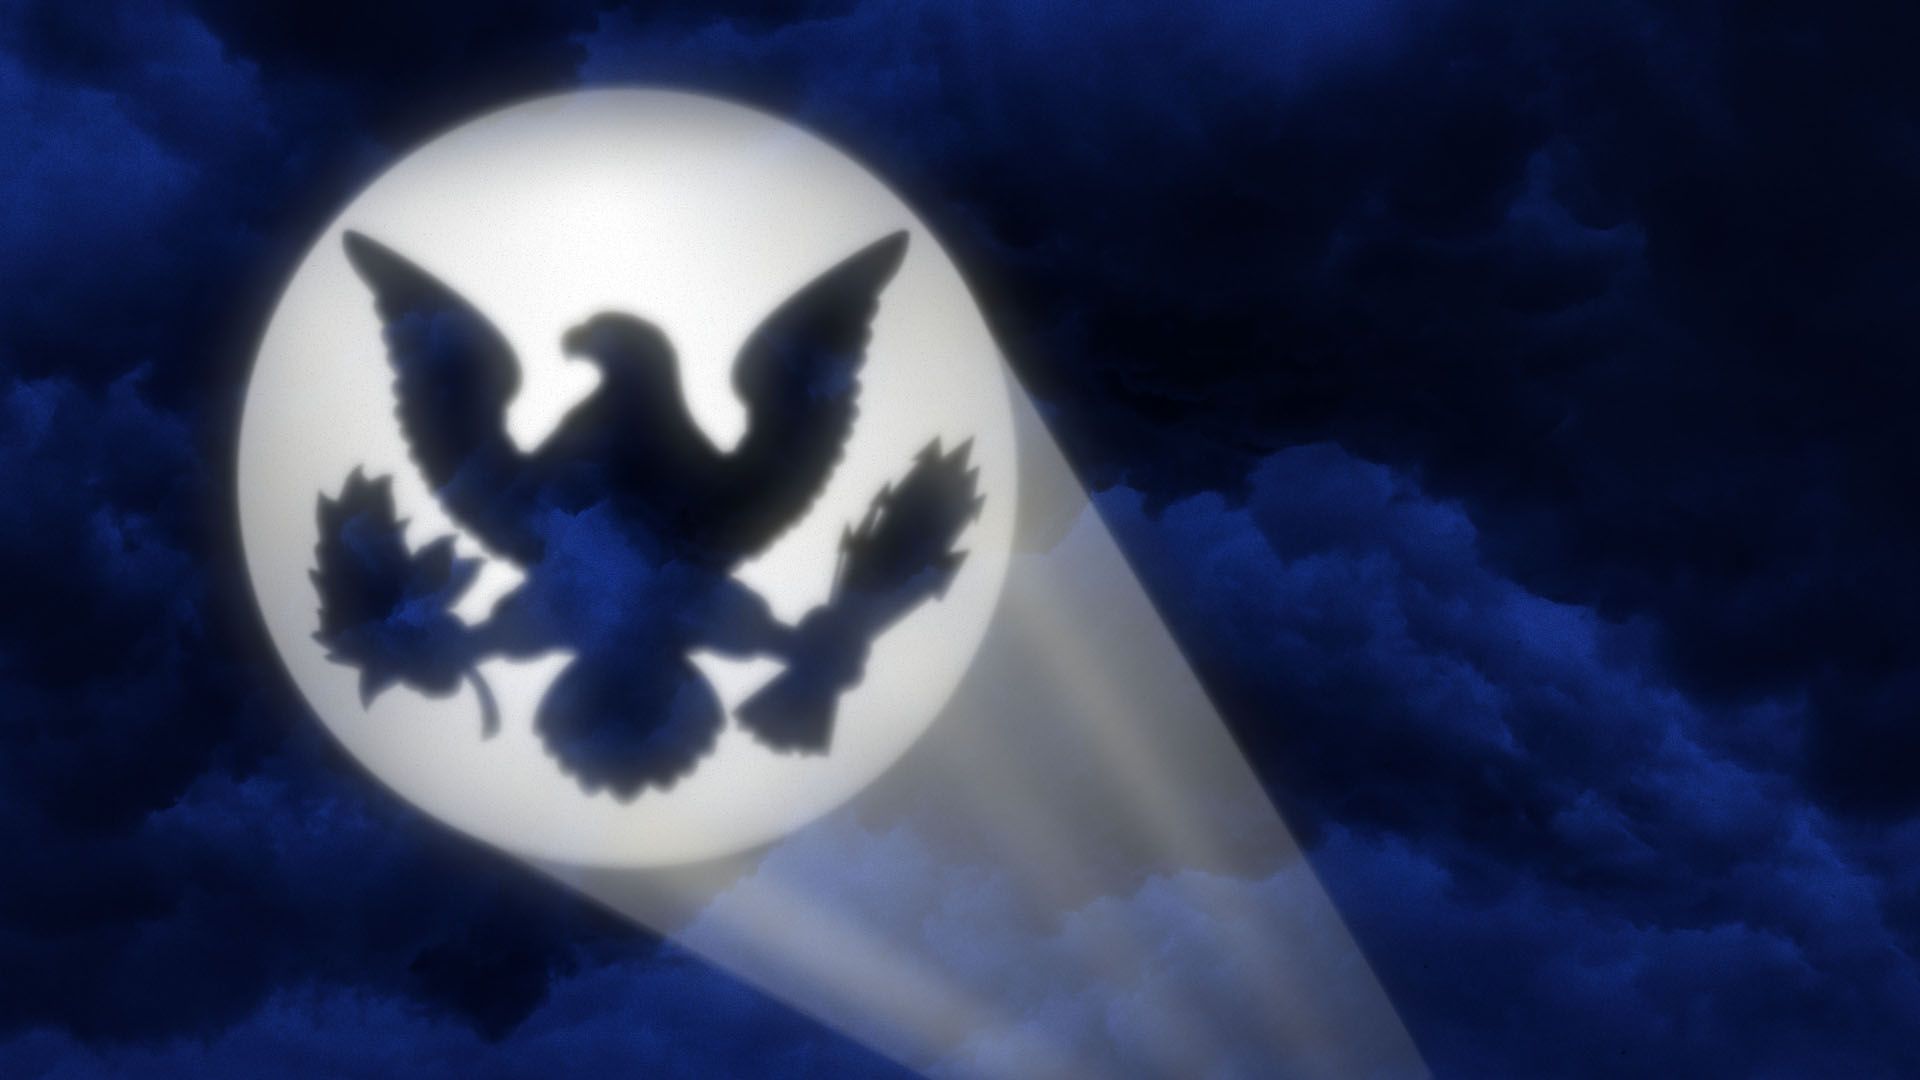 Illustration of the bat signal with the Presidential sea